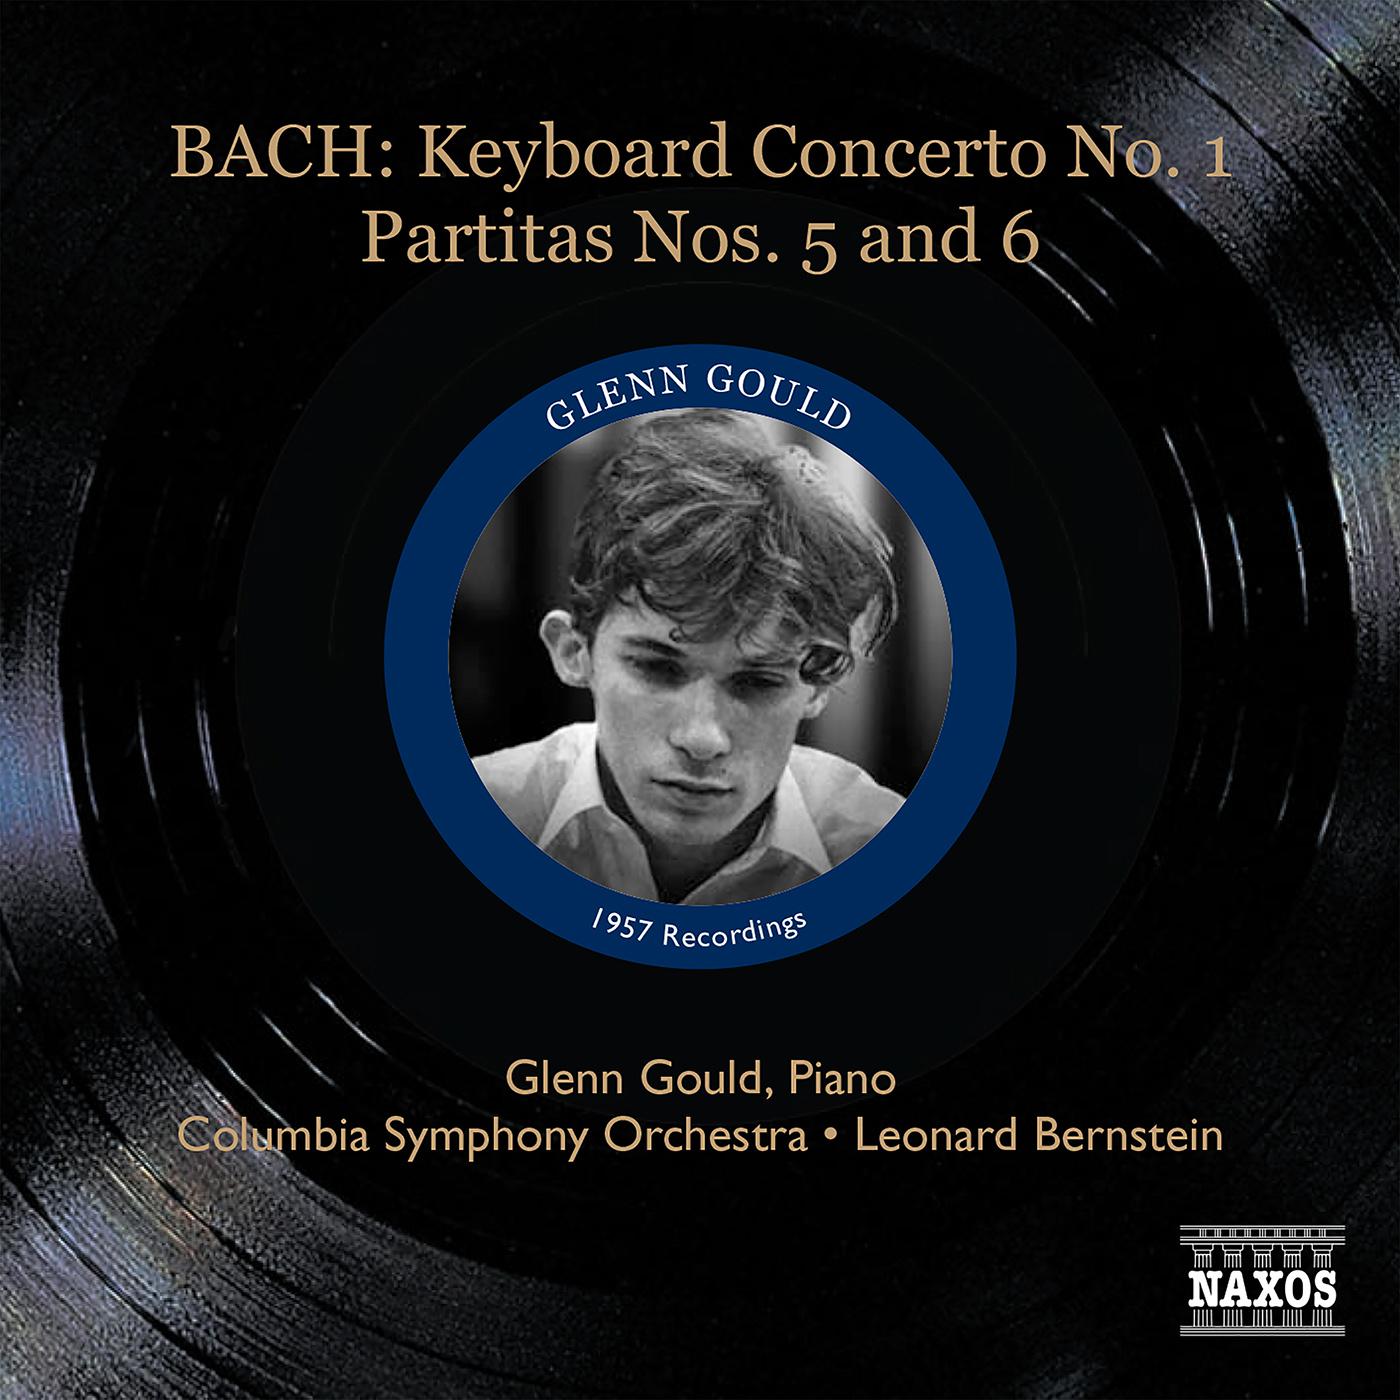 BACH, J.S.: Keyboard Concerto in D Minor, BWV 1052 / Clavierubung, Part I - Partitas Nos. 5 and 6 (Gould) (1957)